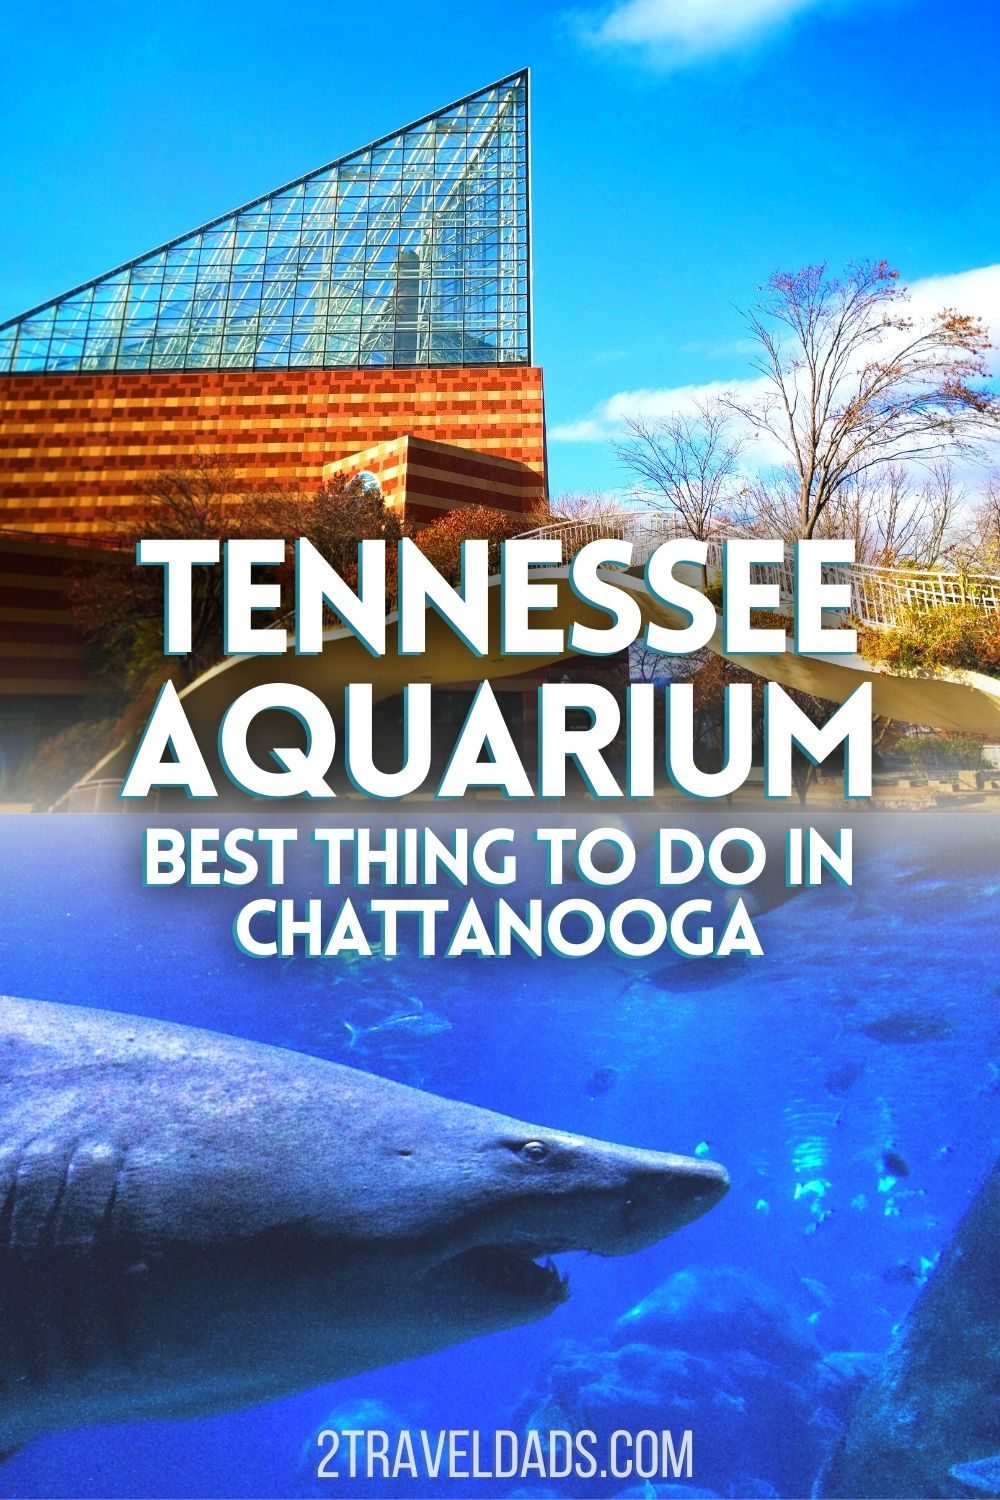 The Tennessee Aquarium in Chattanooga provides the best collection of species with learning and visible conservation effort of any we've been so. See what exhibits are best with kids, the variety of creatures and how to plan a visit to Chattanooga.